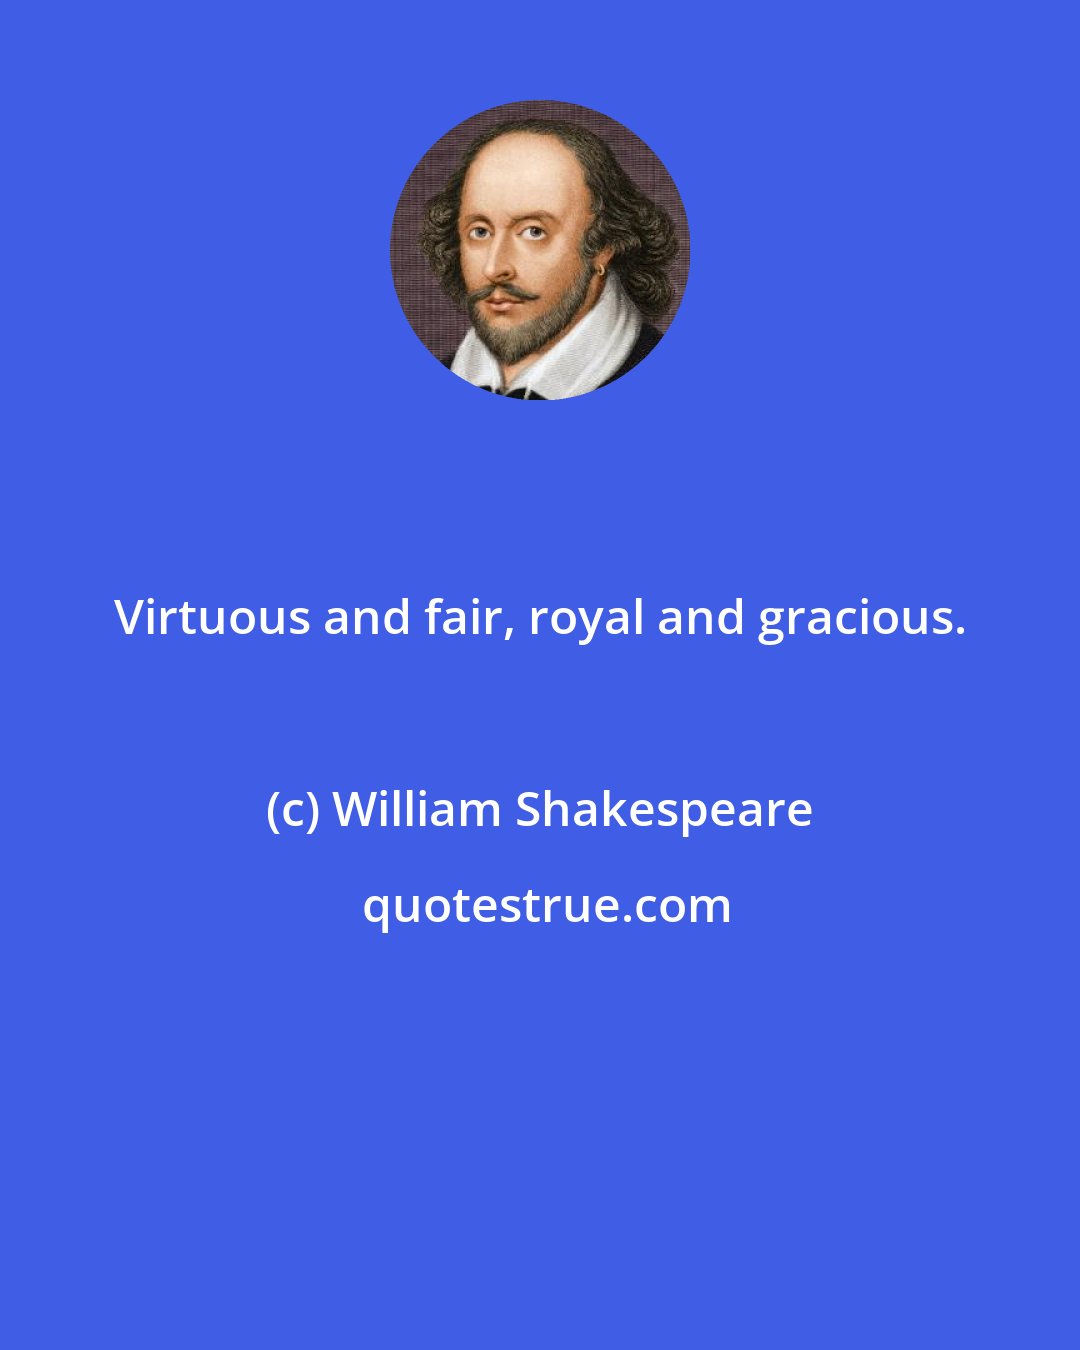 William Shakespeare: Virtuous and fair, royal and gracious.